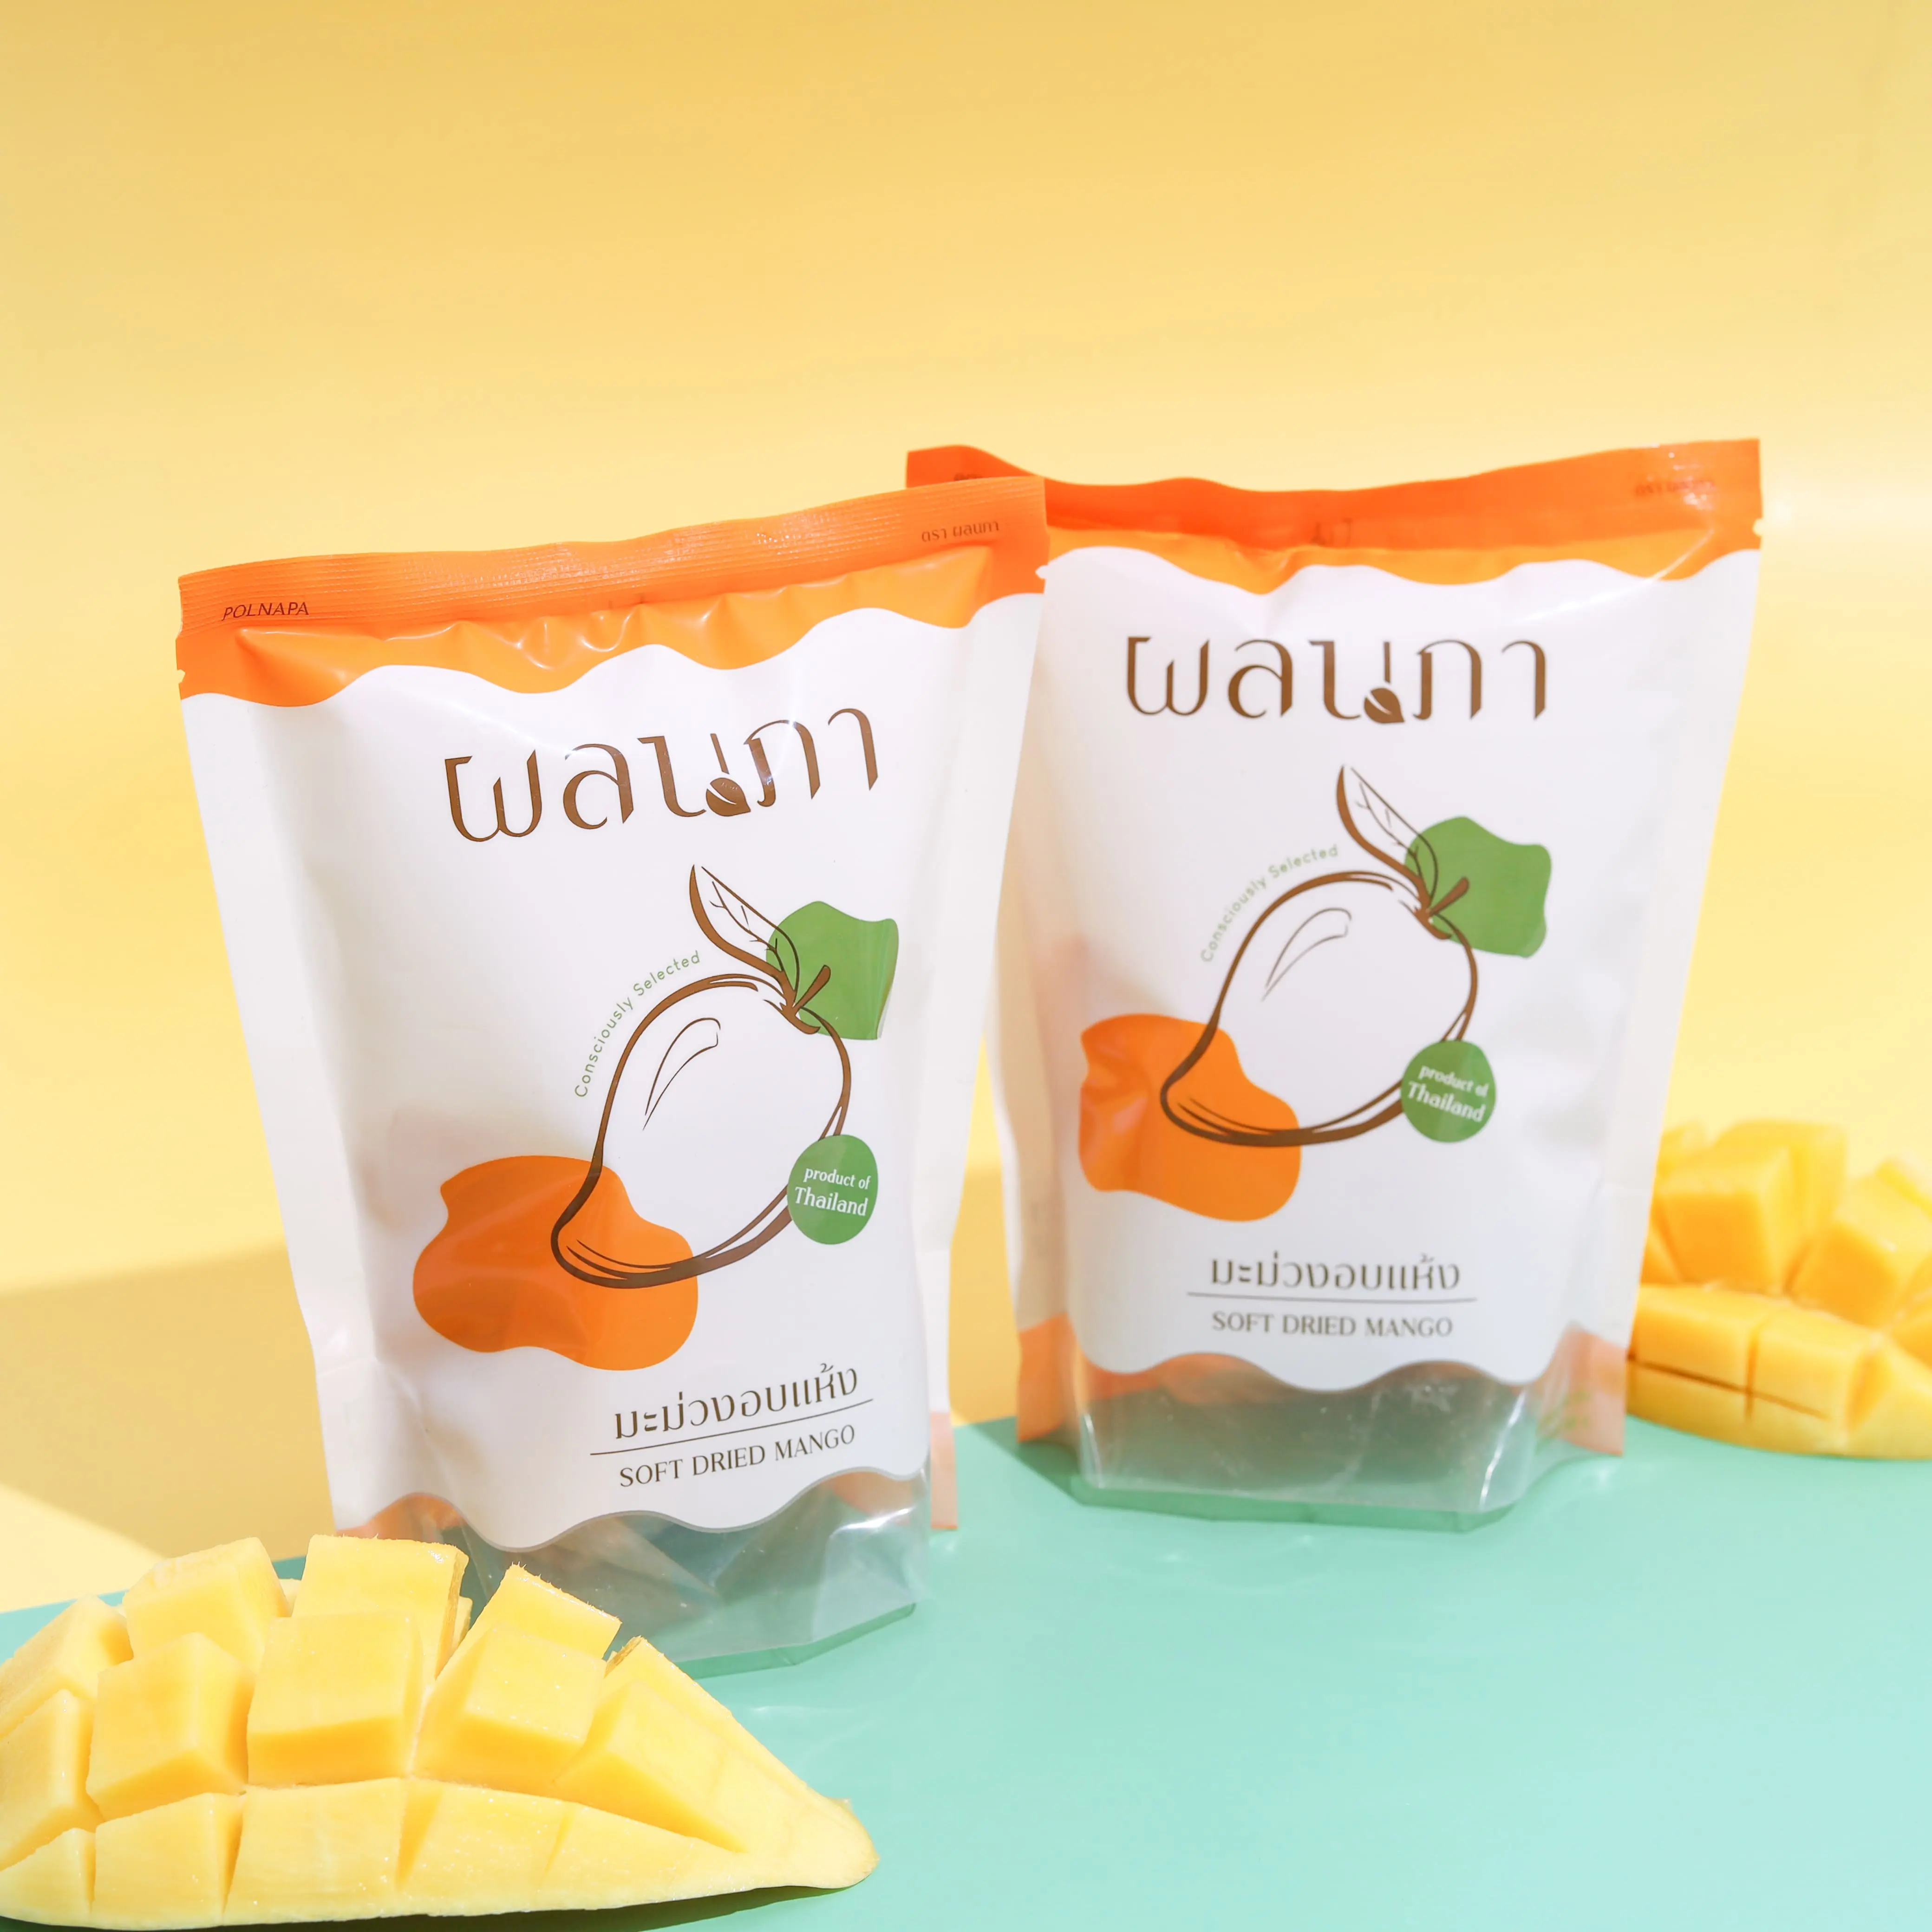 Soft Dried Mangoes Natural Sweetness Normal or Small Bite Size 80 G/Bag Product from Polnapa Mangoes Brand